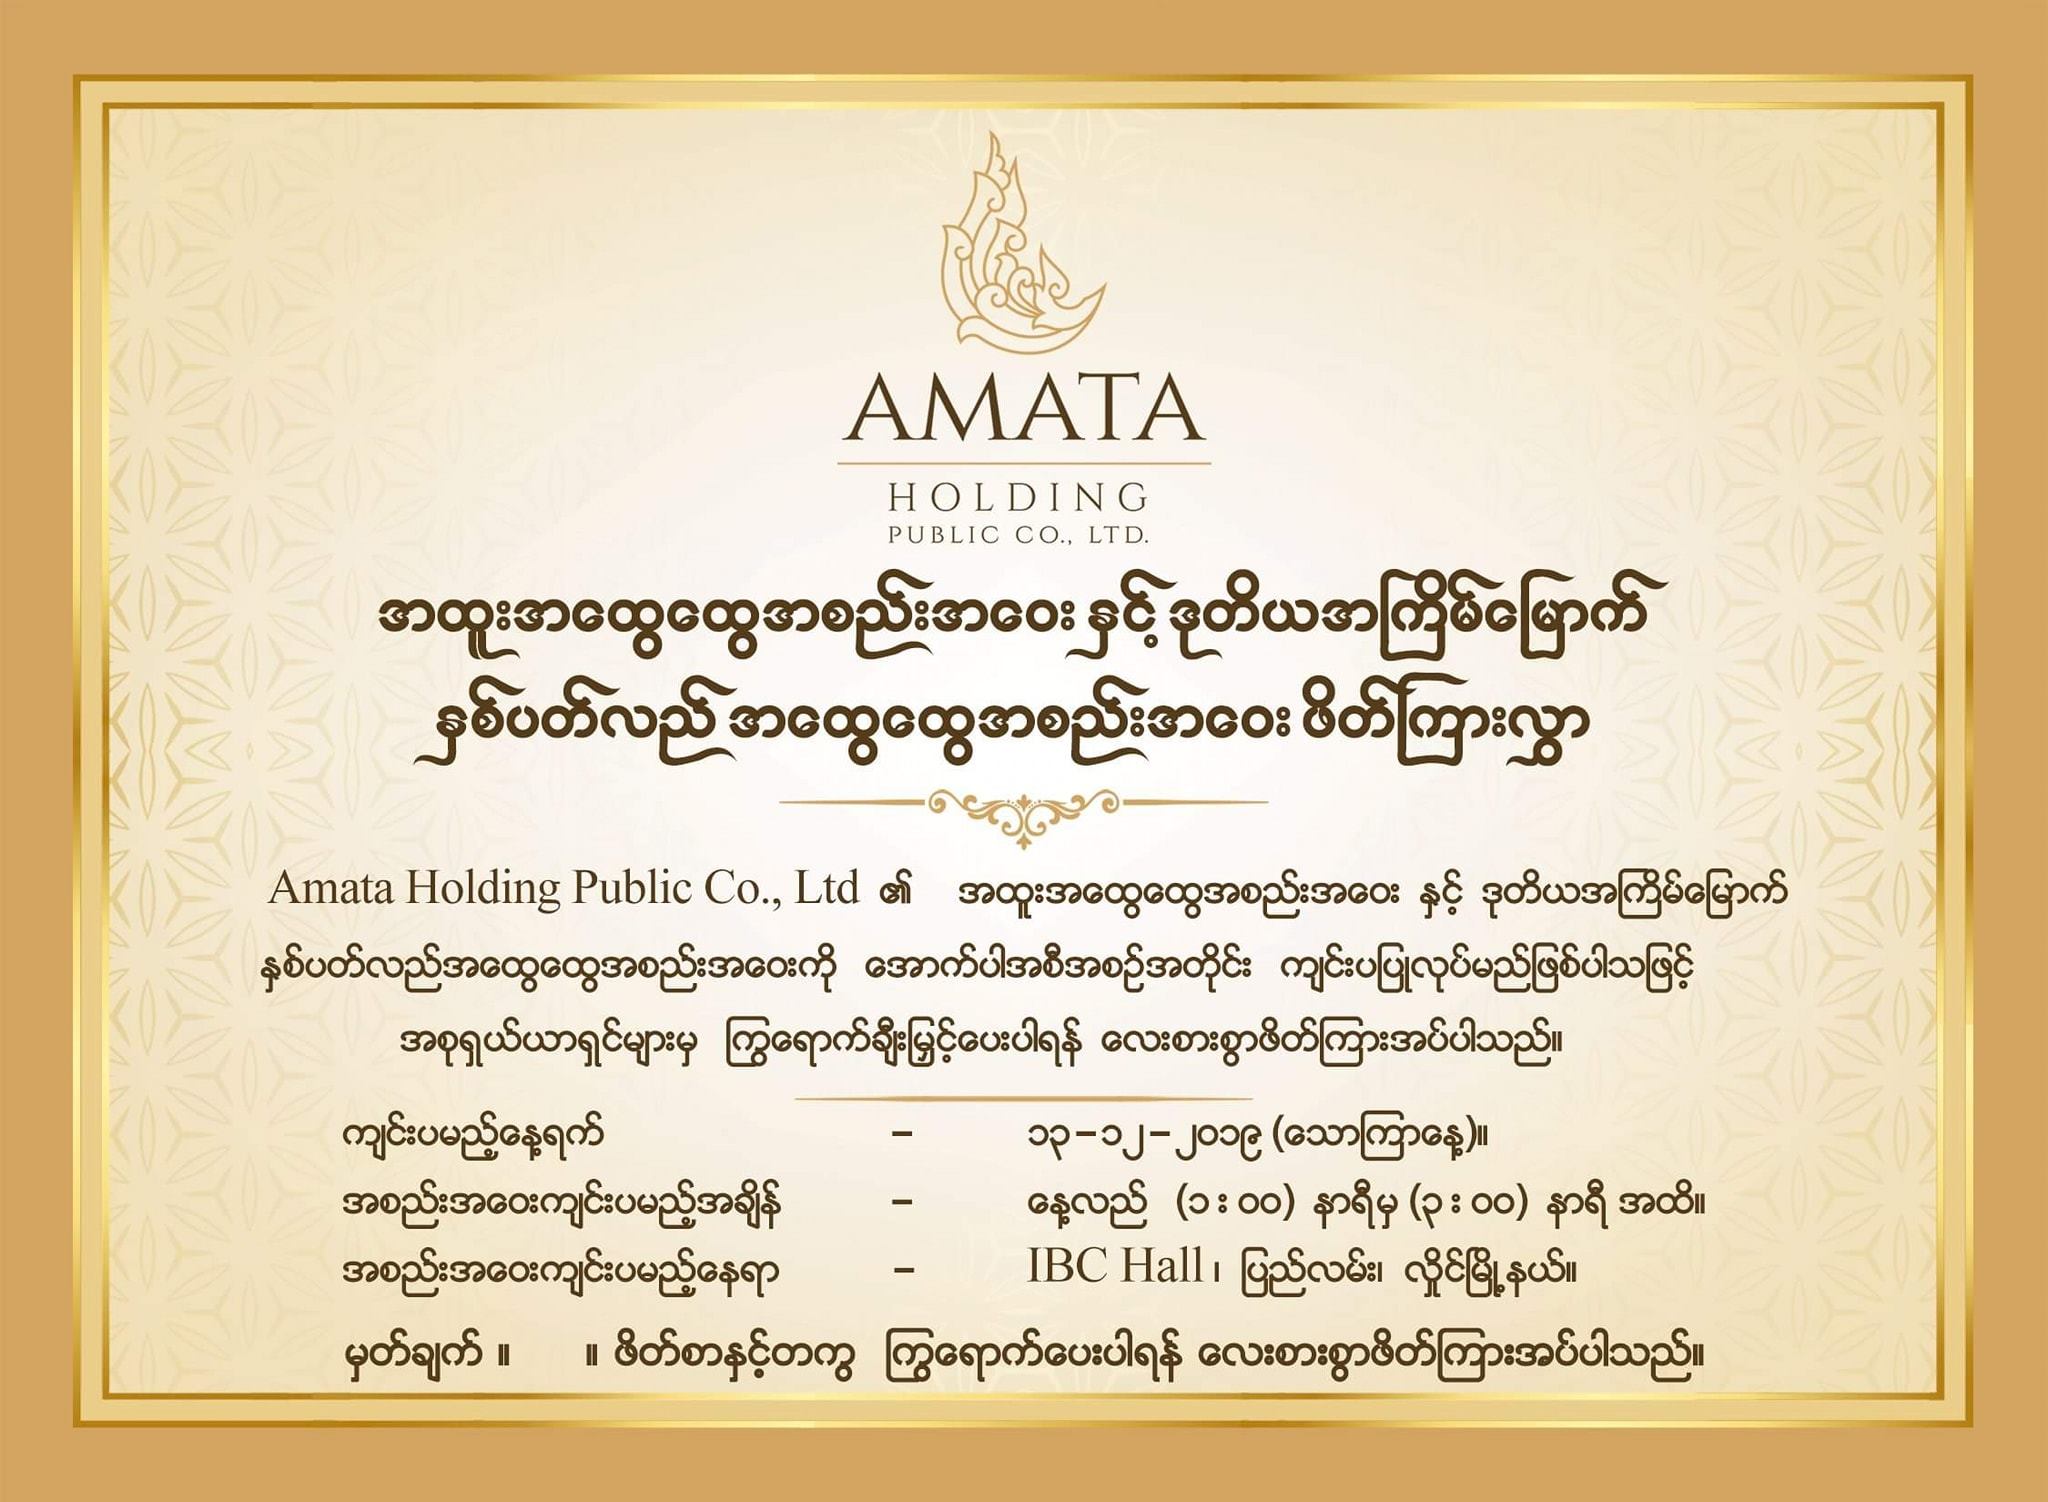 Invitation for Amata Holding Public Co., Ltd Annual Meeting in 2019, December